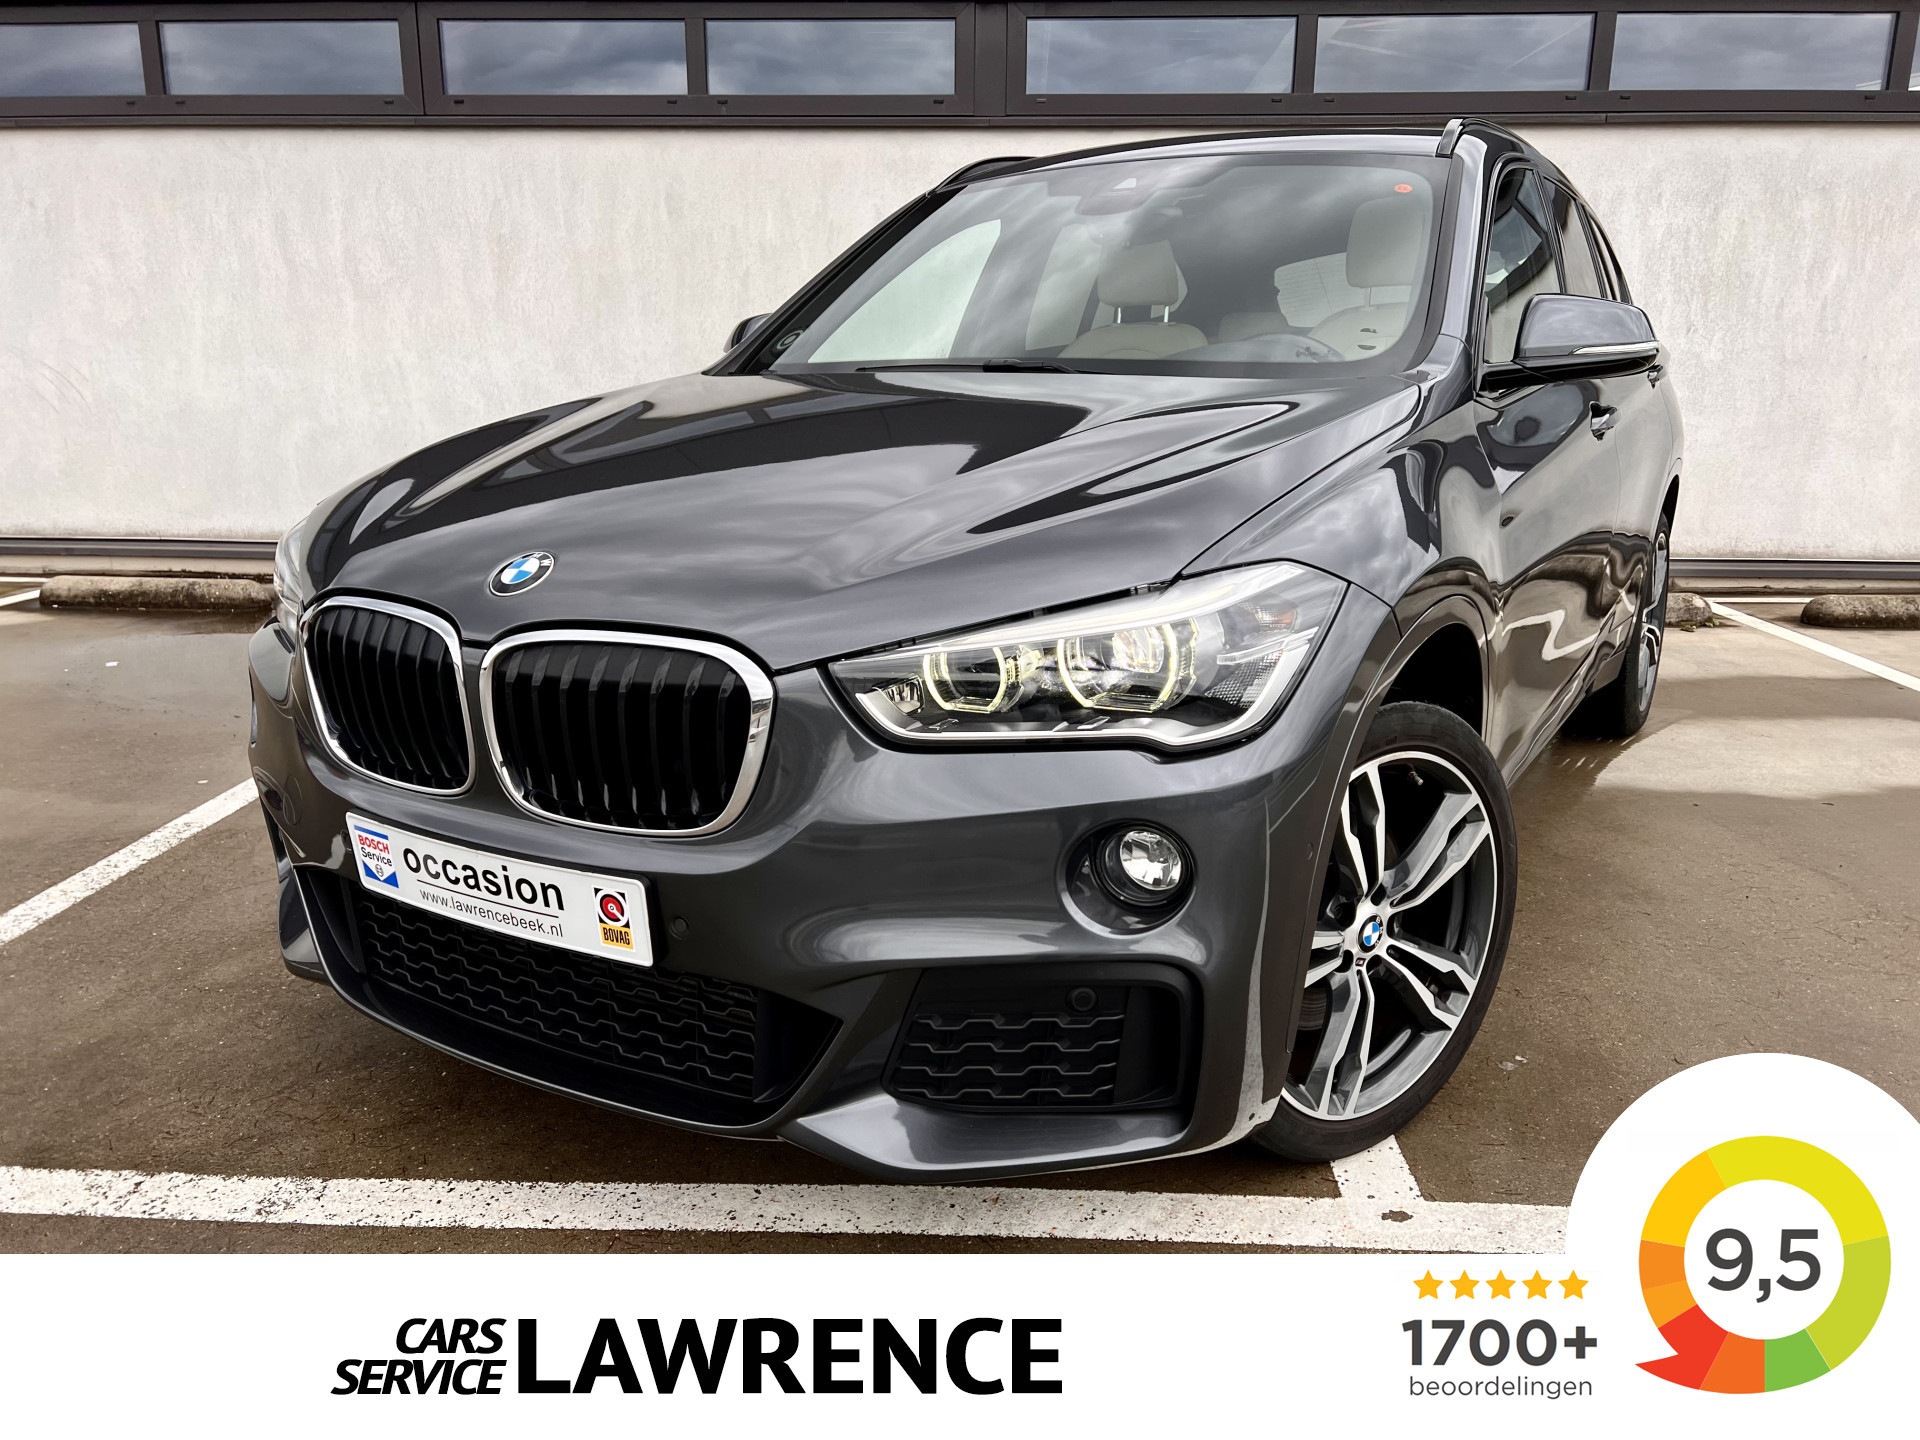 BMW X1 xDrive25i M Sport 231 PK | Leer | Pano |Head Up | Camera | % Bovag Occasion Partner %